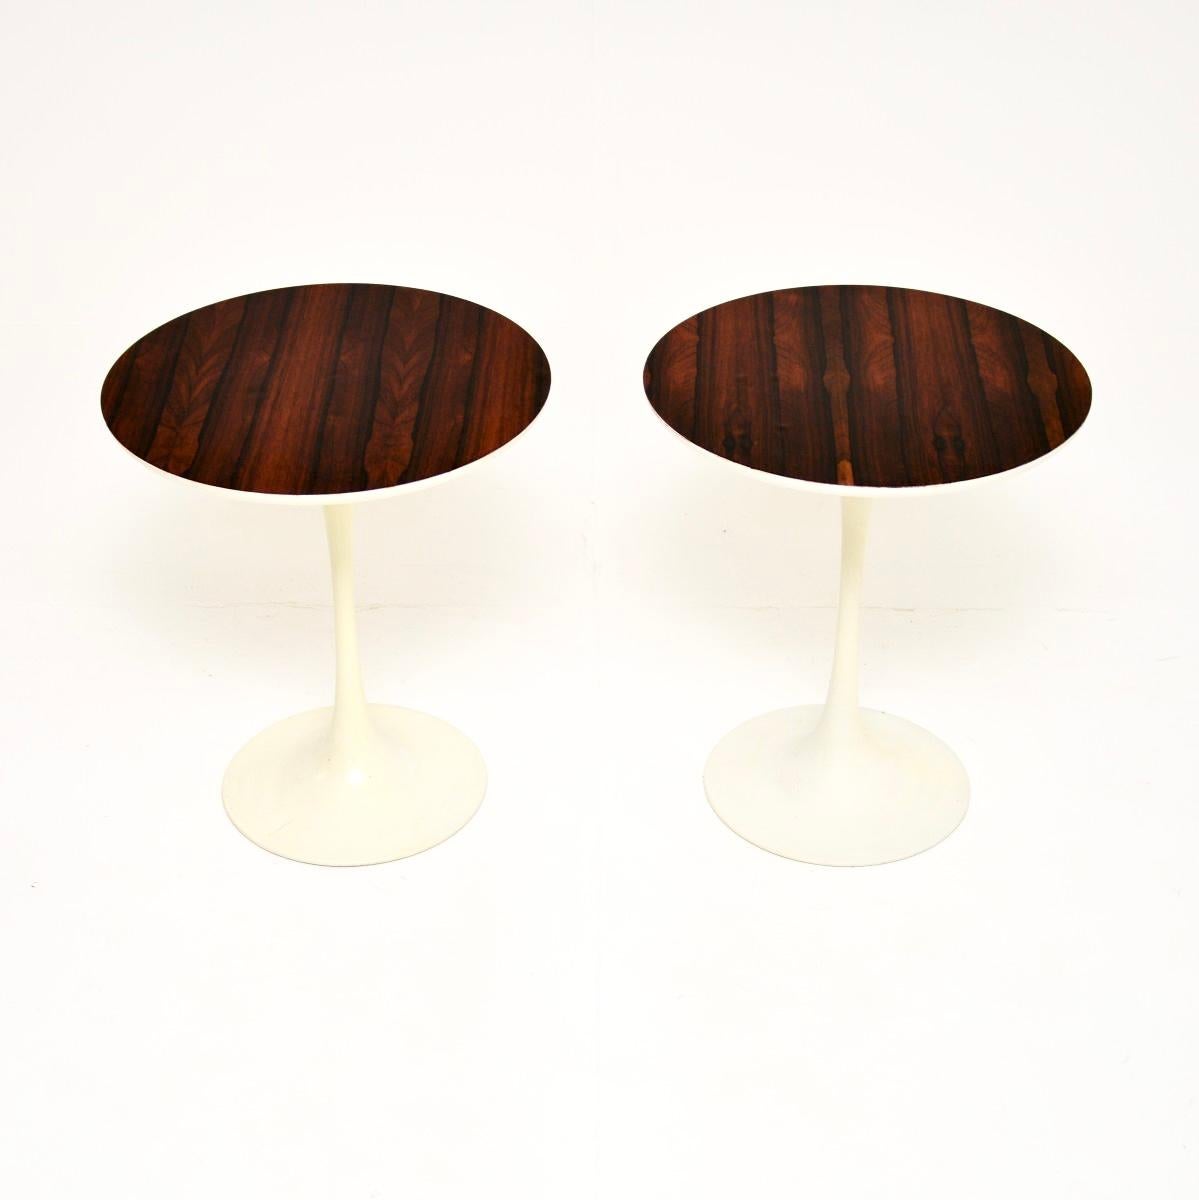 A stylish and very well made pair of vintage tulip side tables by Arkana. They were designed by Maurice Burke, and were made in England in the 1960’s.

The quality is superb, they are a very useful size and have a beautiful design. The circular